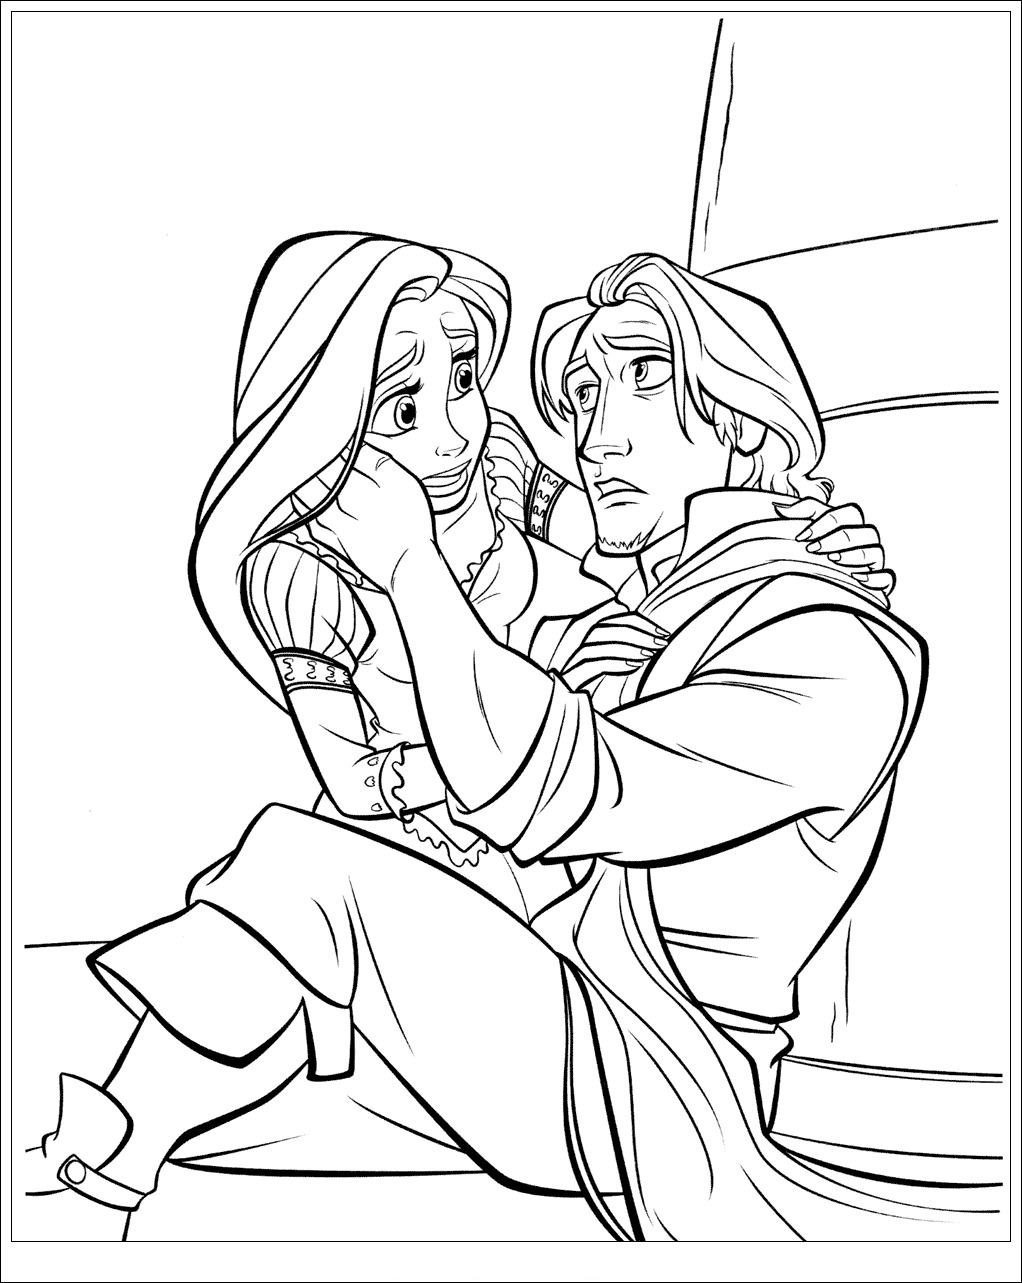 Tangled to download - Tangled Kids Coloring Pages